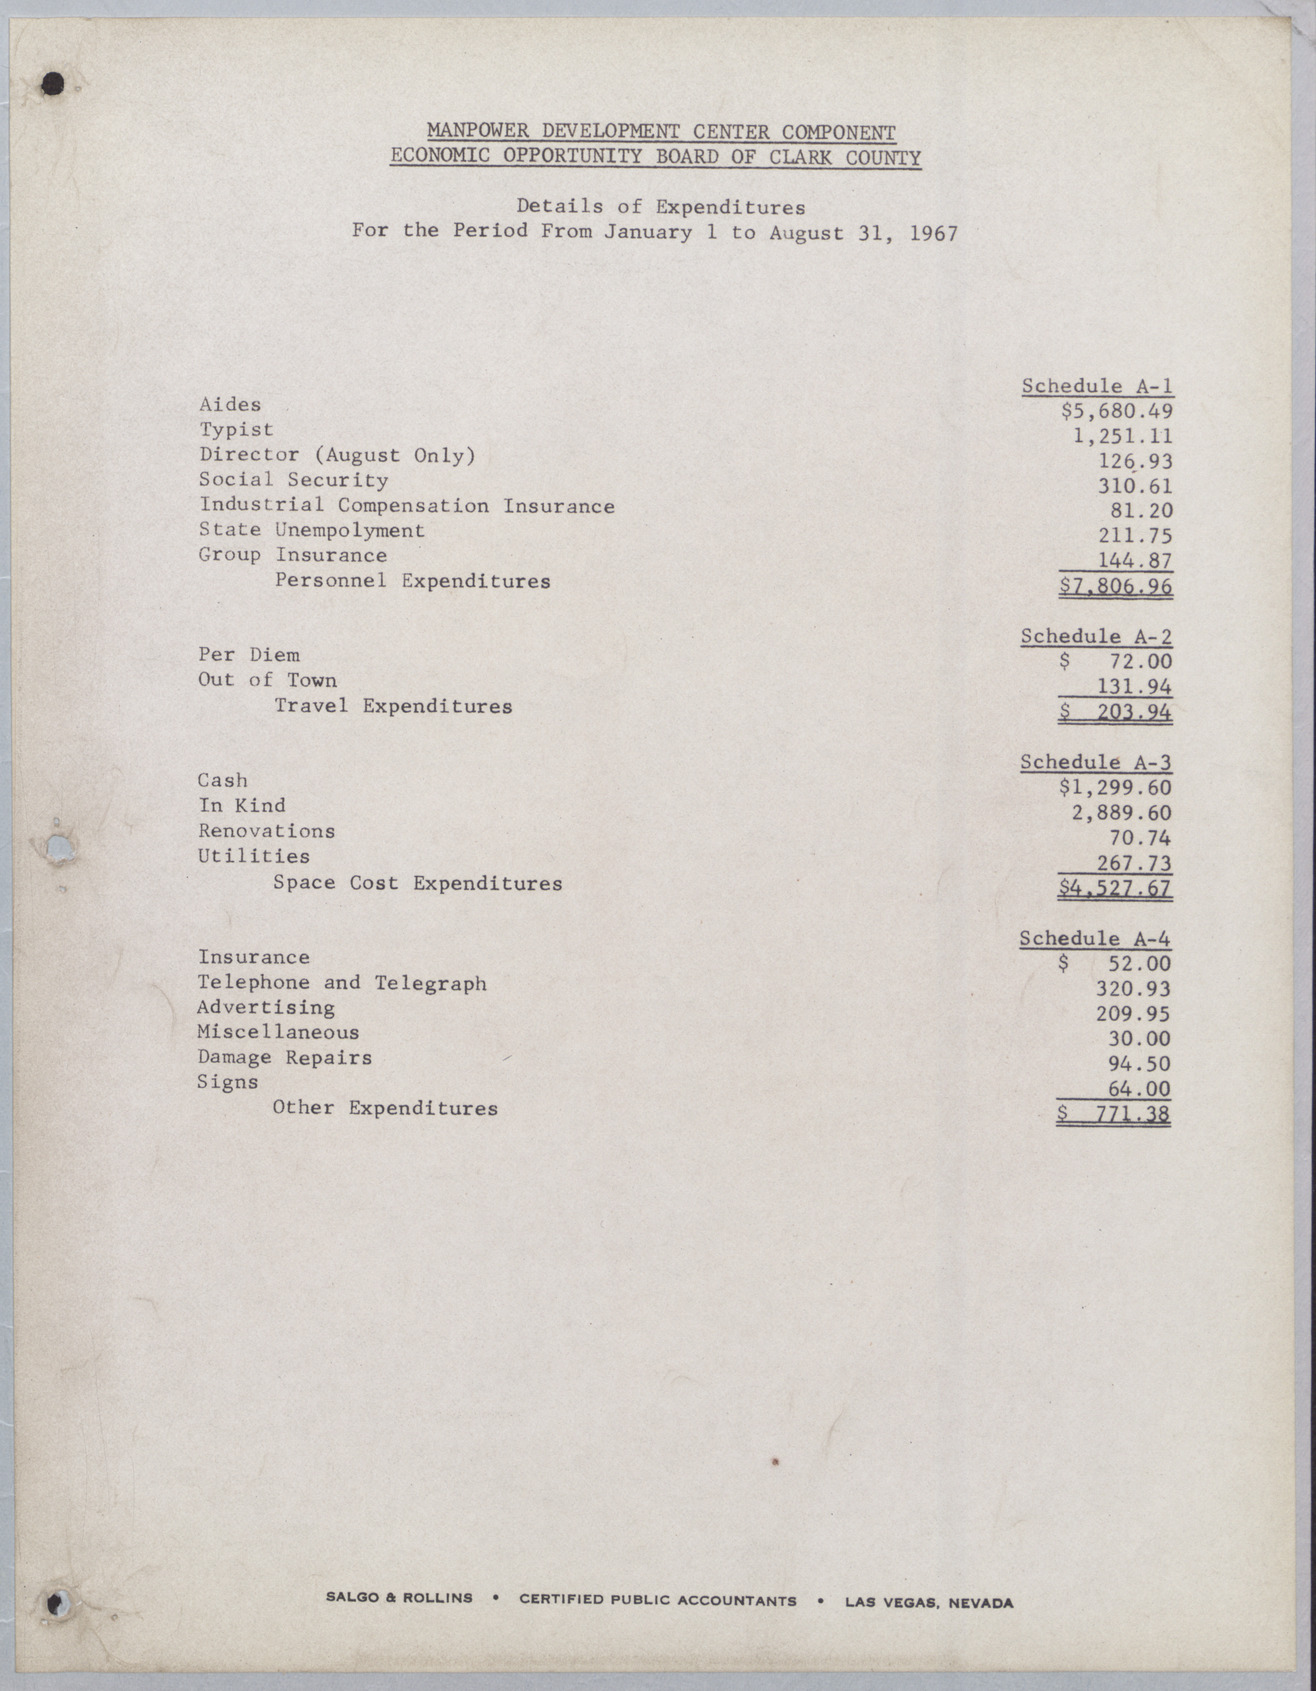 Manpower Development Center Component EOB of Clark County Report on Examination of Revenues and Expenditures for the period from January 1 to August 31, 1967 (5 pages), page 5